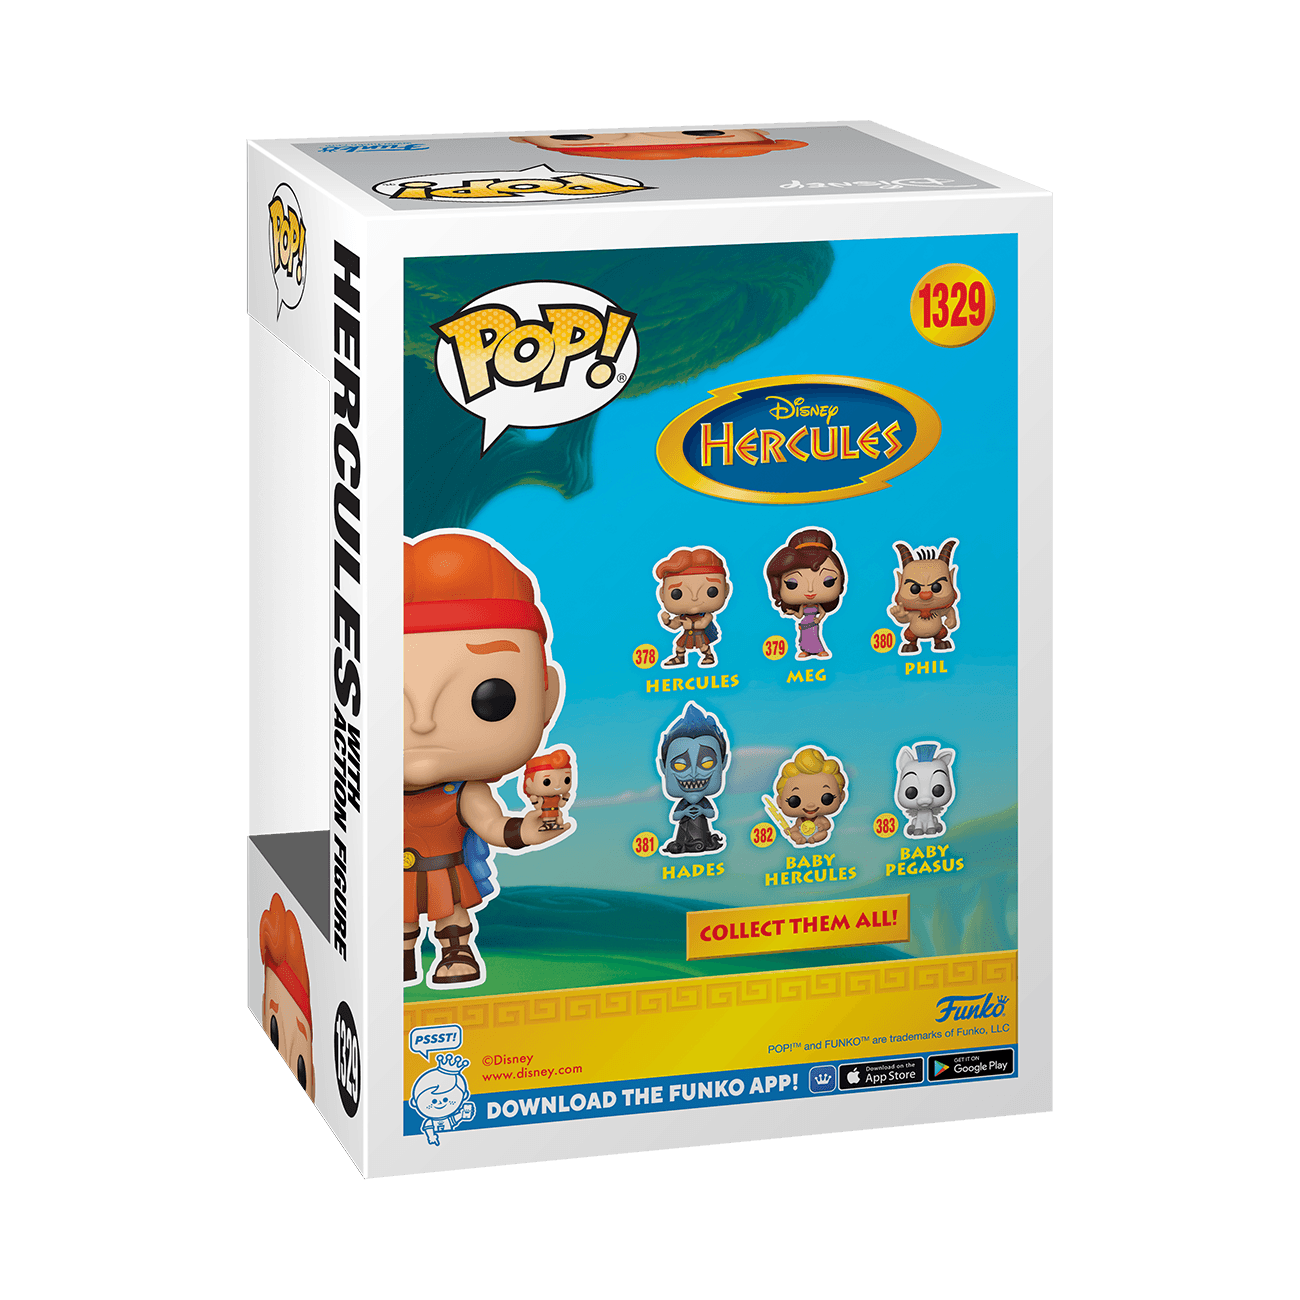 FUN69370 Hercules - Hercules with Action Figure WC Exclusive Pop! [RS] - Less Than Perfect - Funko - Titan Pop Culture